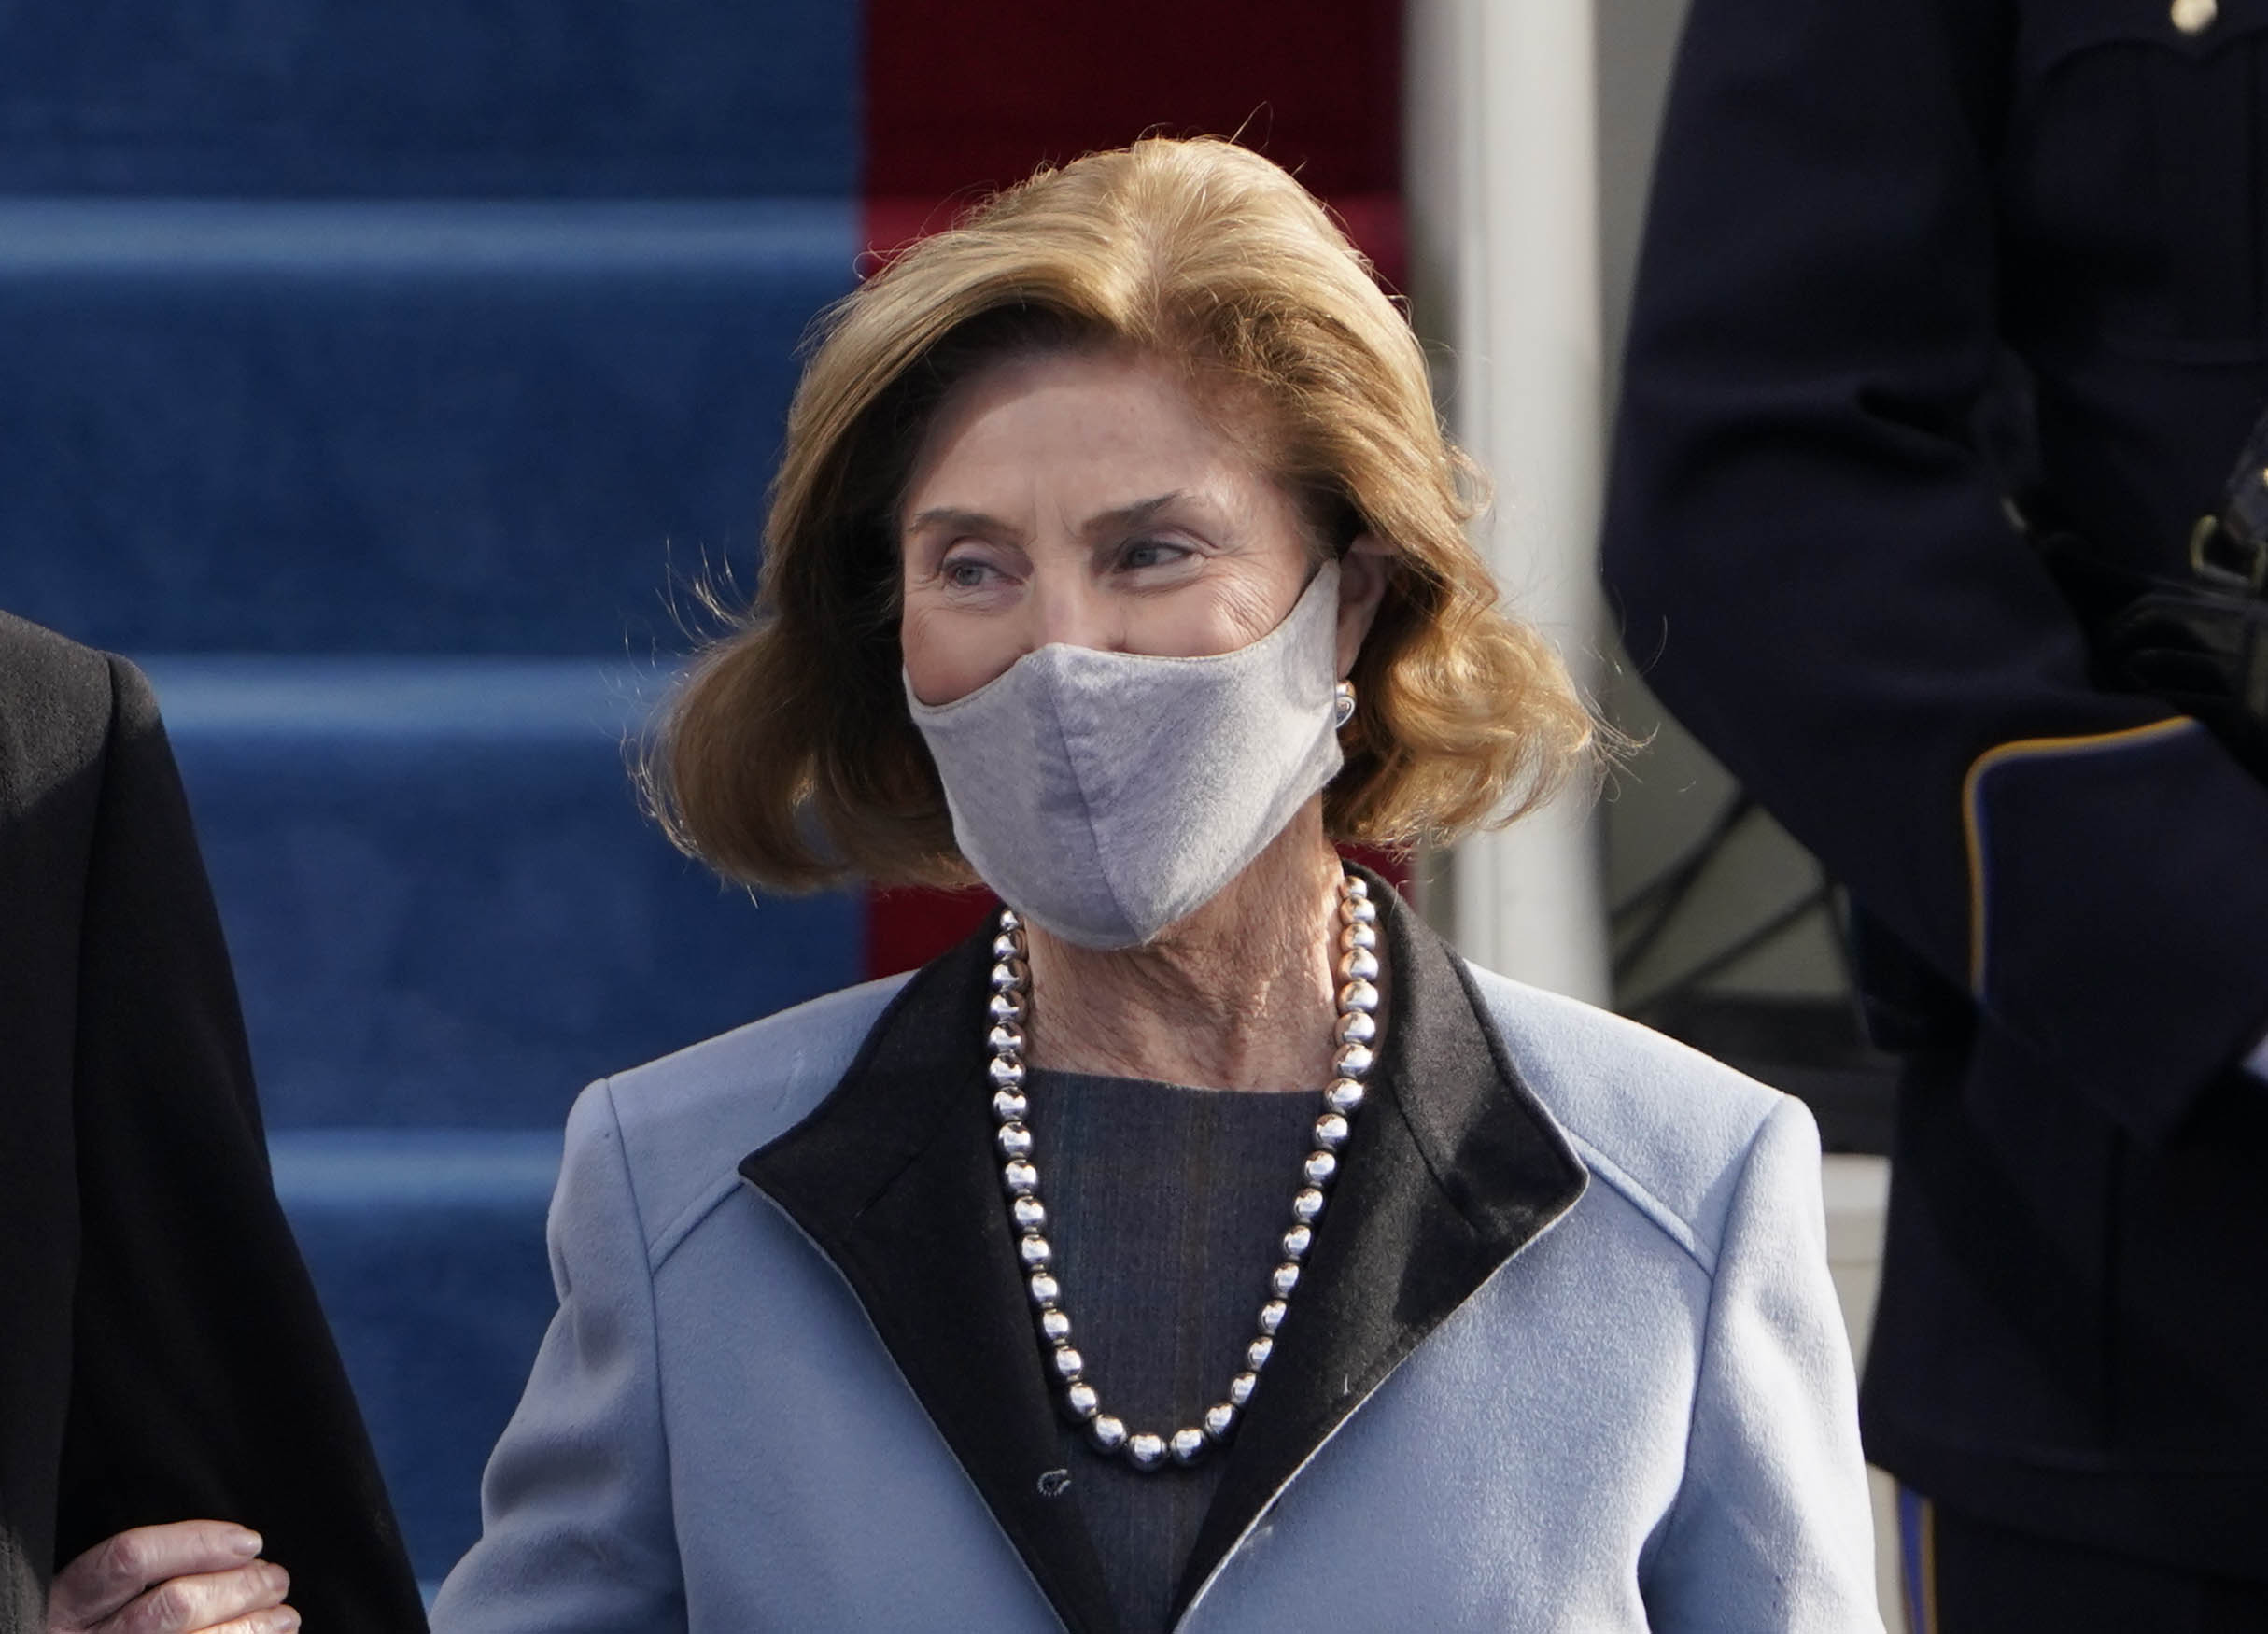 Laura Bush's Blue Outfit Had Flats With Bows on Inauguration Day 2021